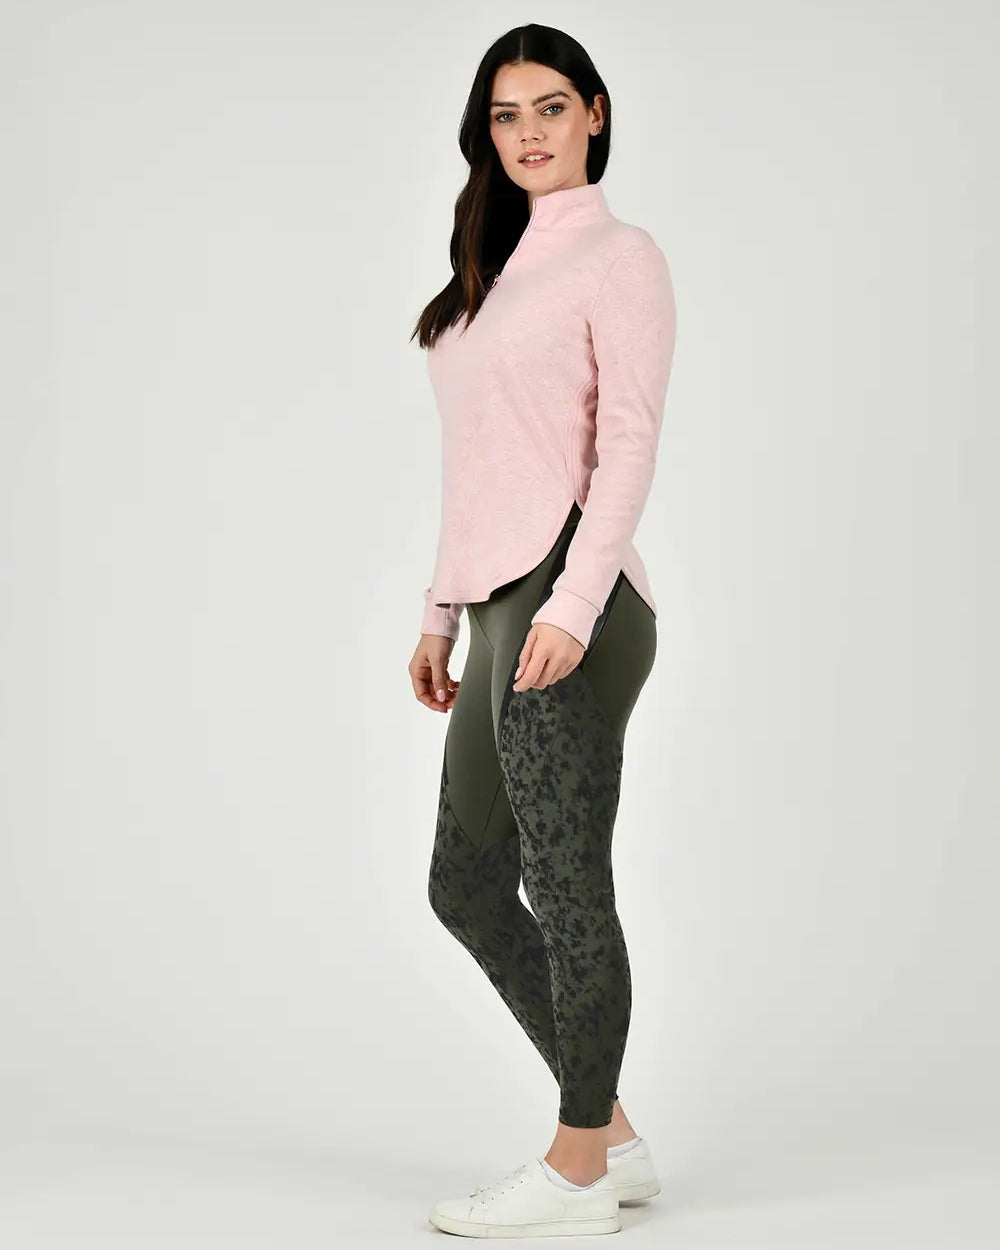 Blush Coloured WeatherBeeta London Layer Long Sleeve Top On A grey Background 